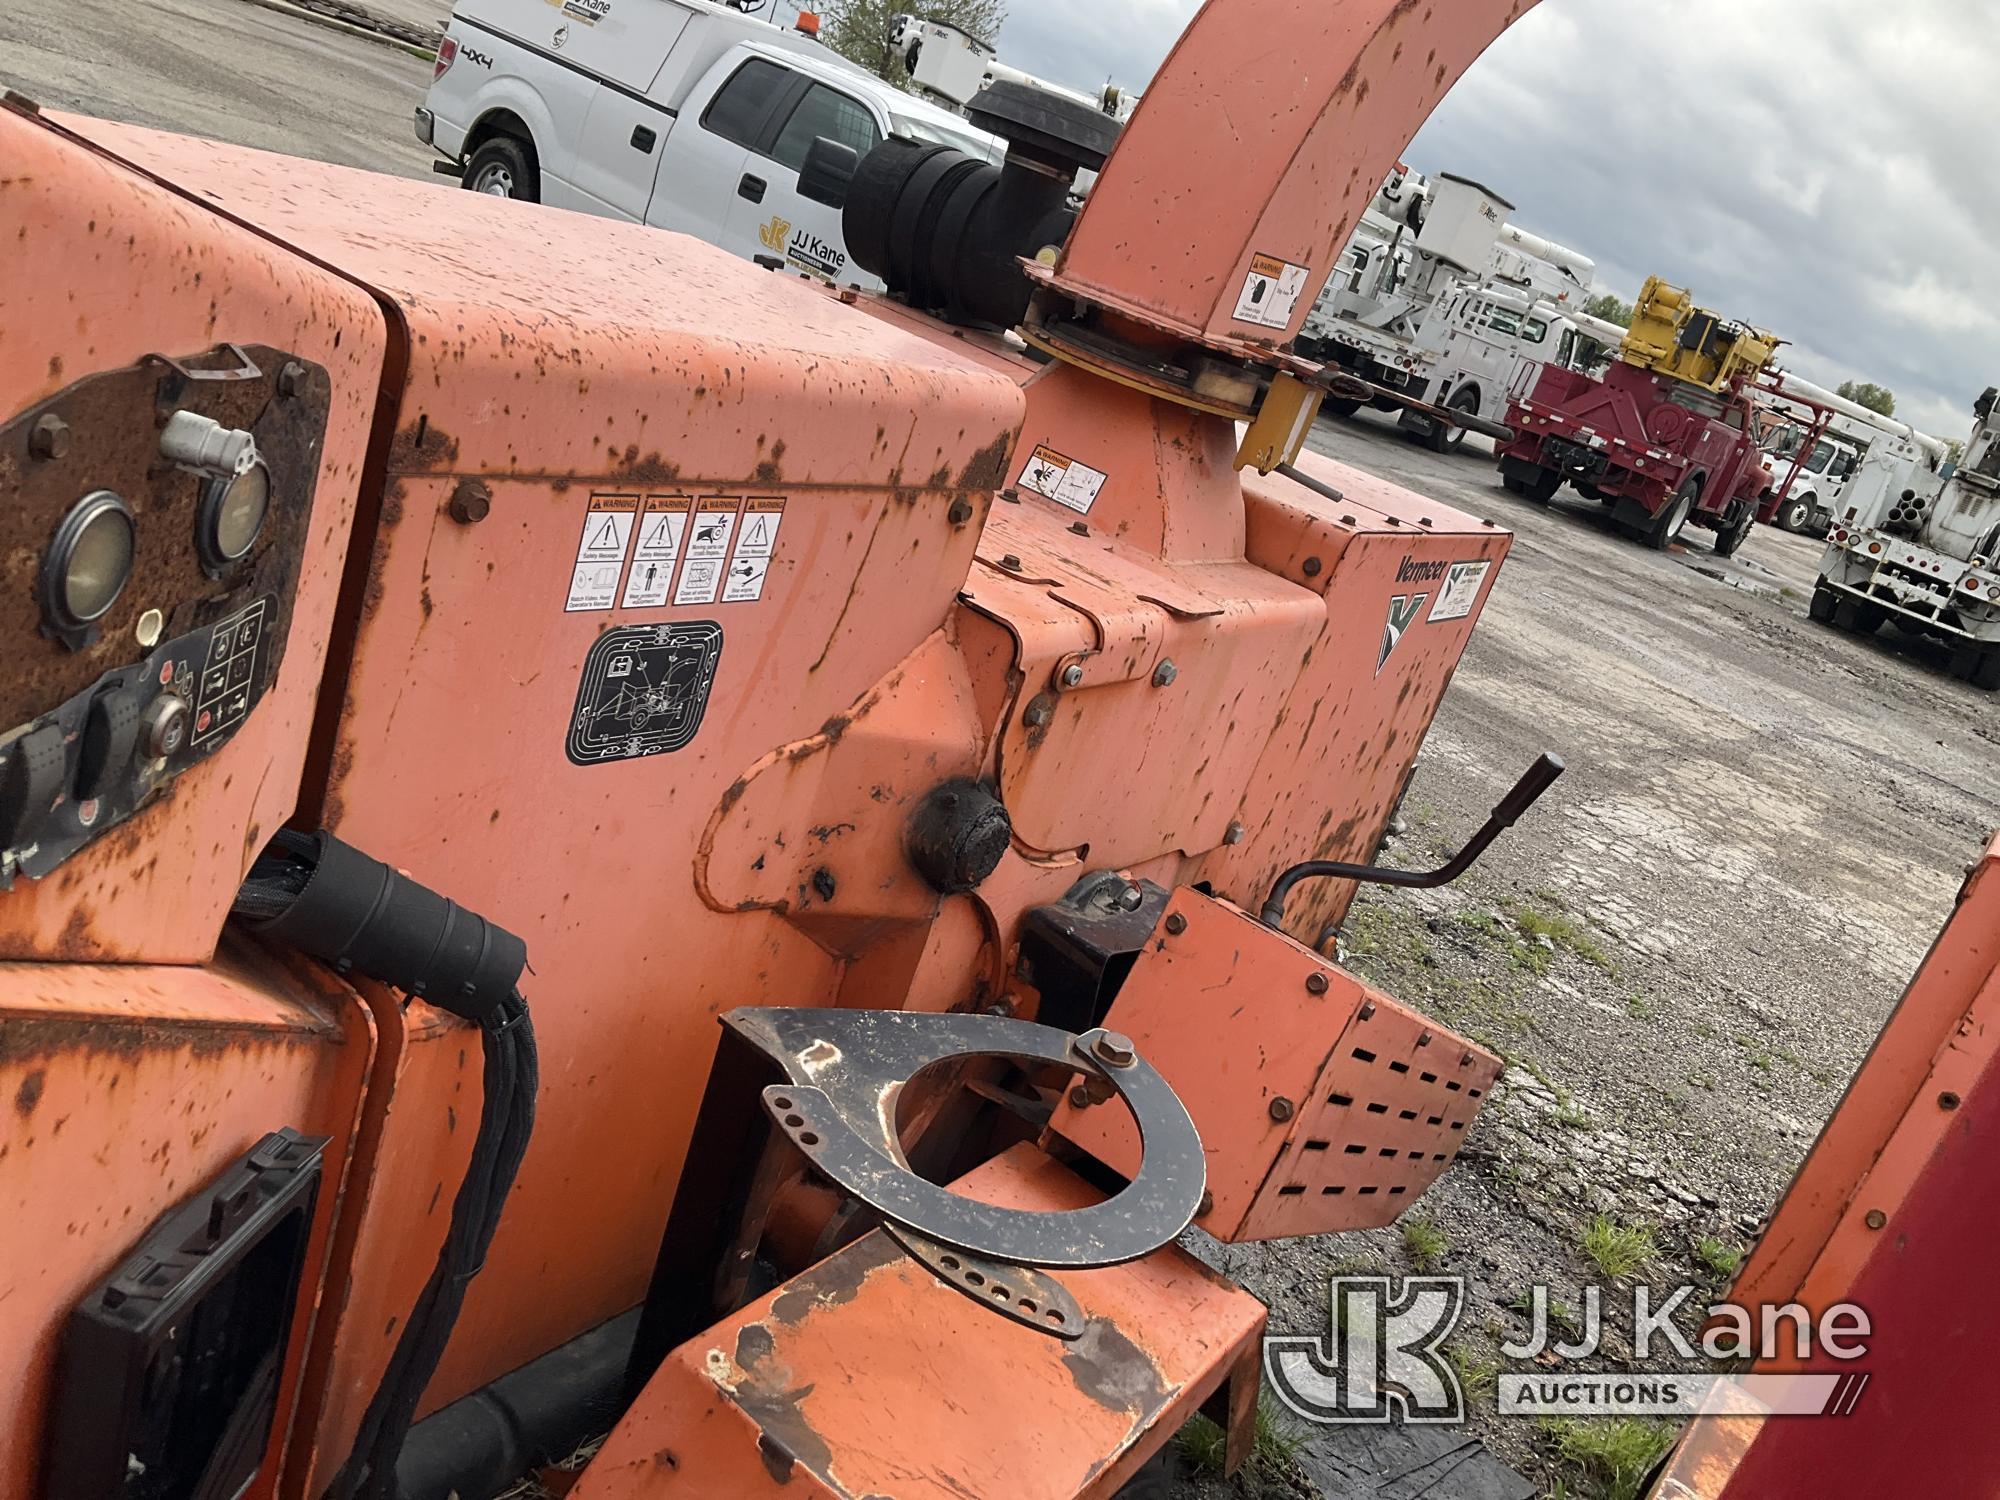 (Kansas City, MO) 2011 Vermeer BC1000XL Chipper (12in Drum) Not Running, Condition Unknown, Bad Engi